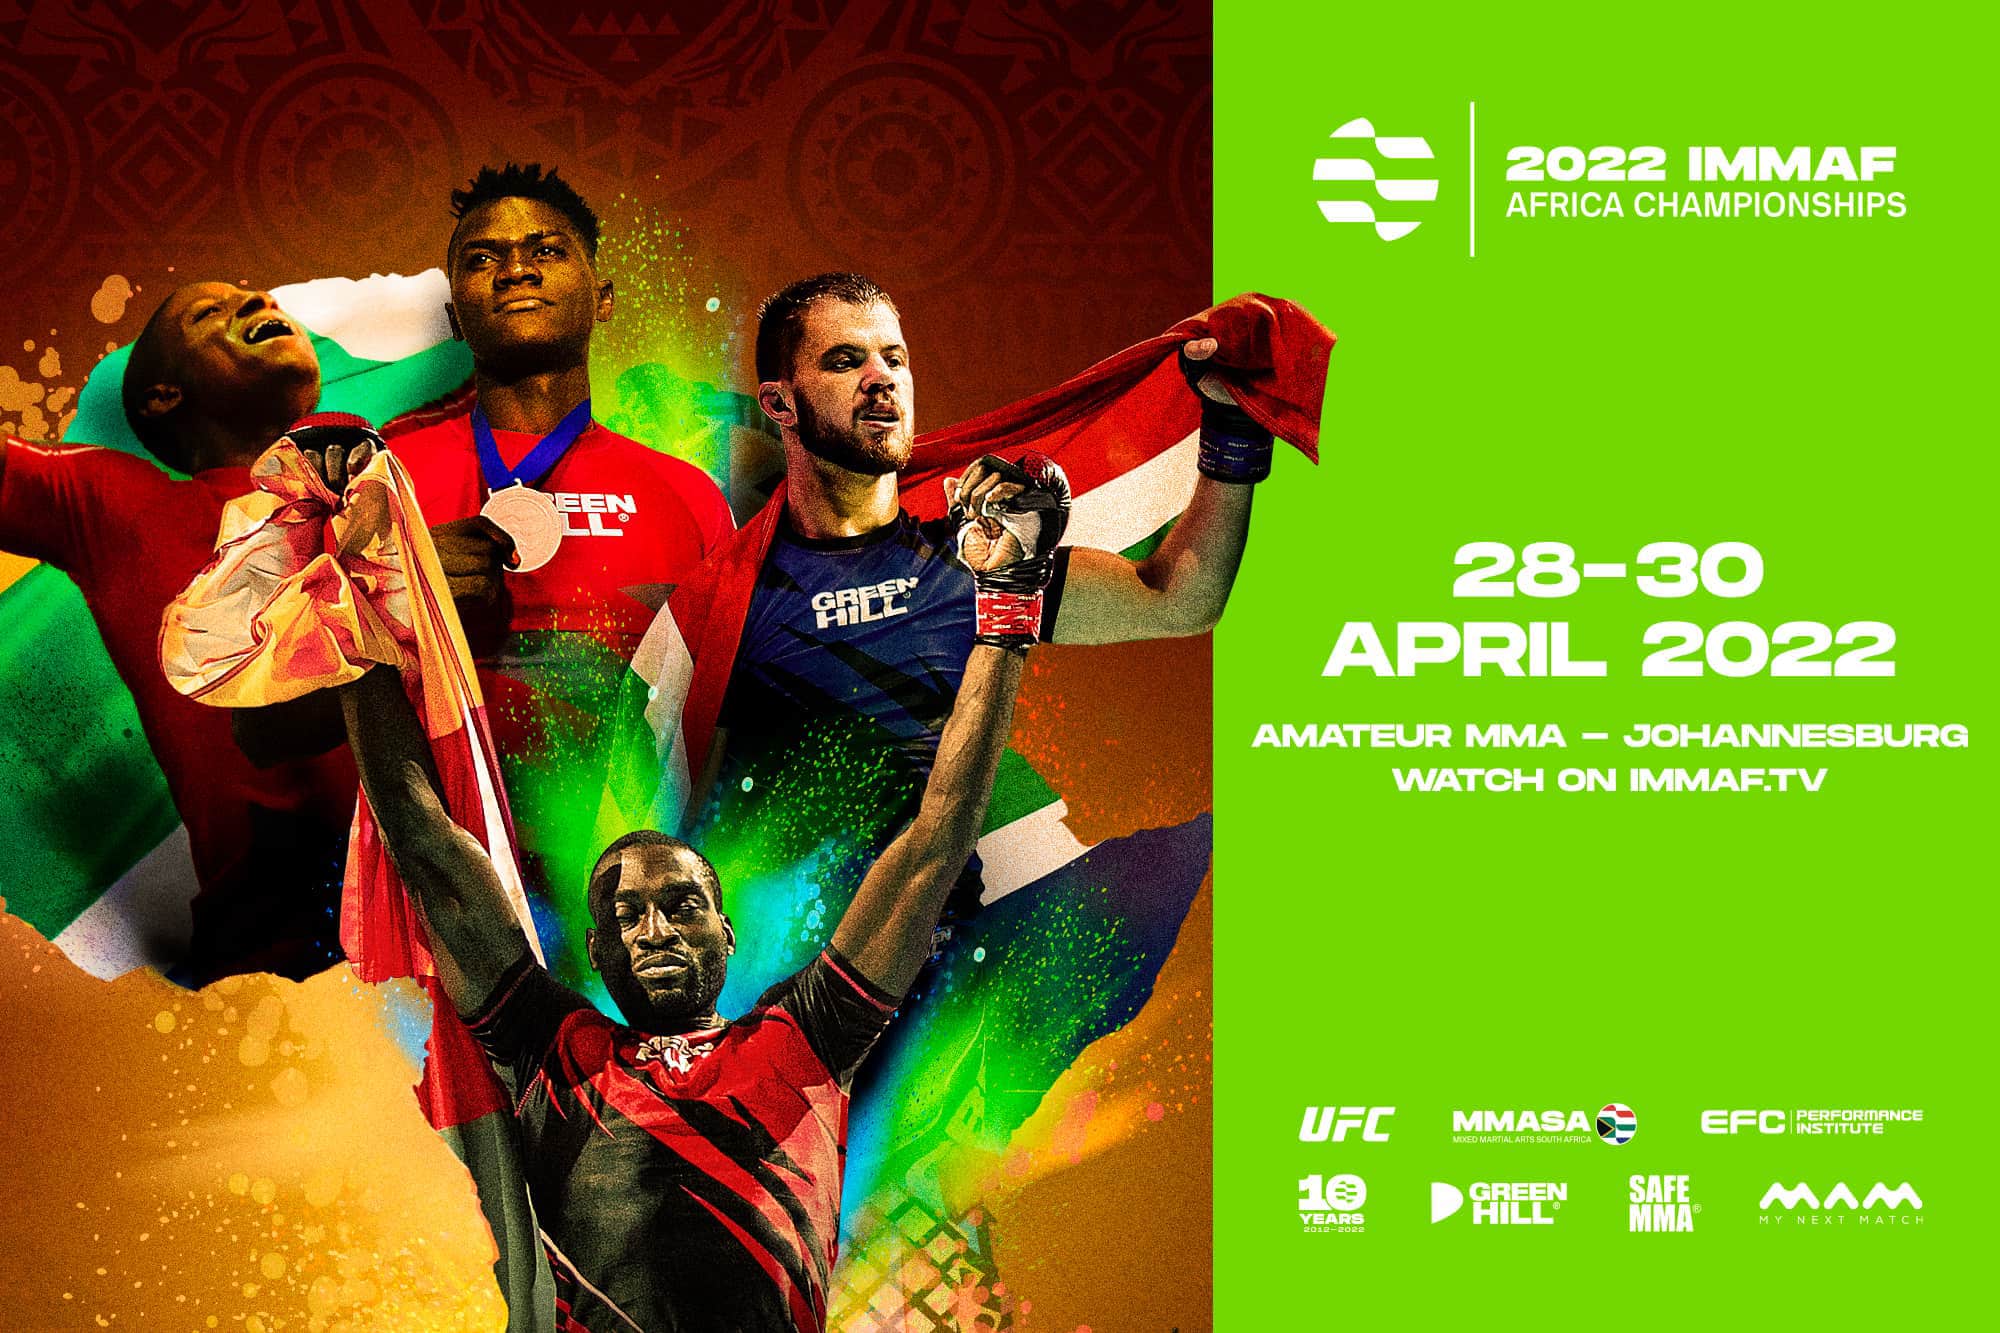 IMMAF 2022 Africa Championships